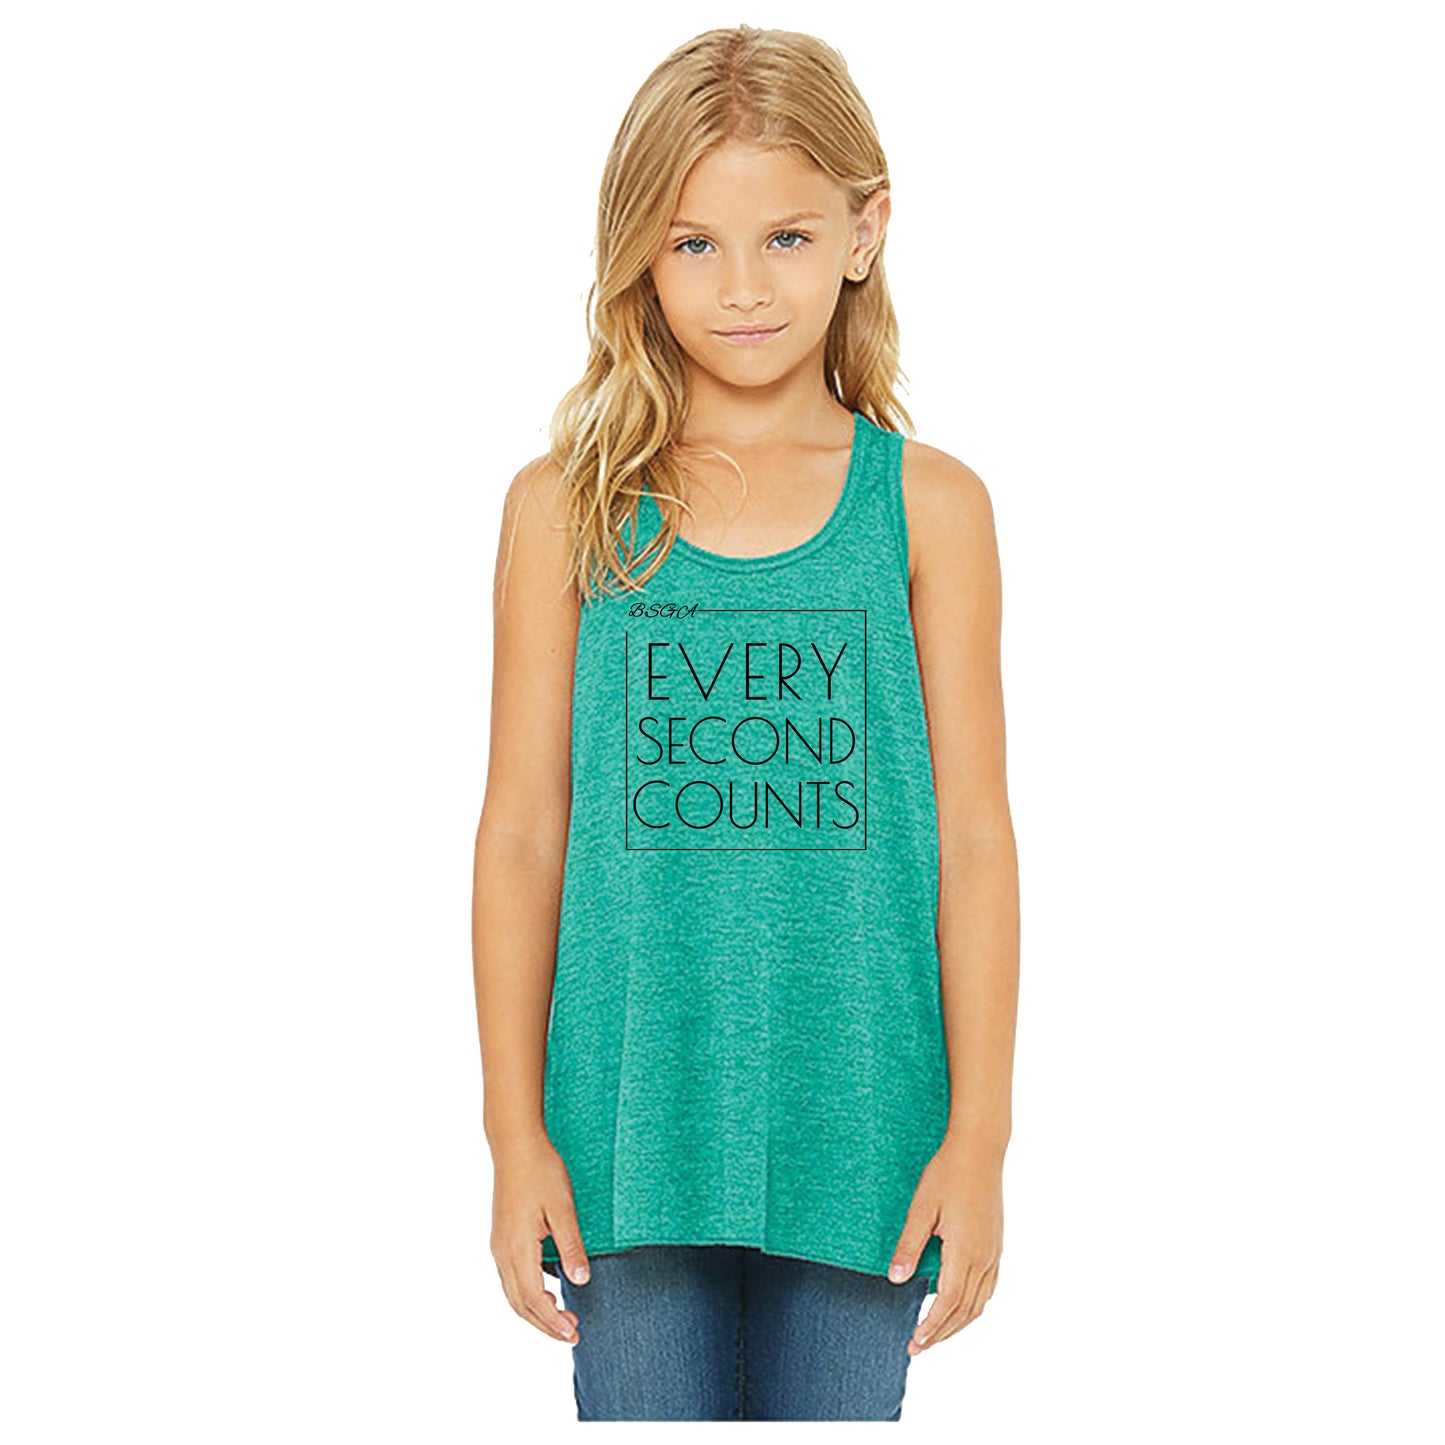 BRIGHT STARS GYMNASTICS ACADEMY | YOUTH TEAL FLOWY TANK | EVERY SECOND COUNTS